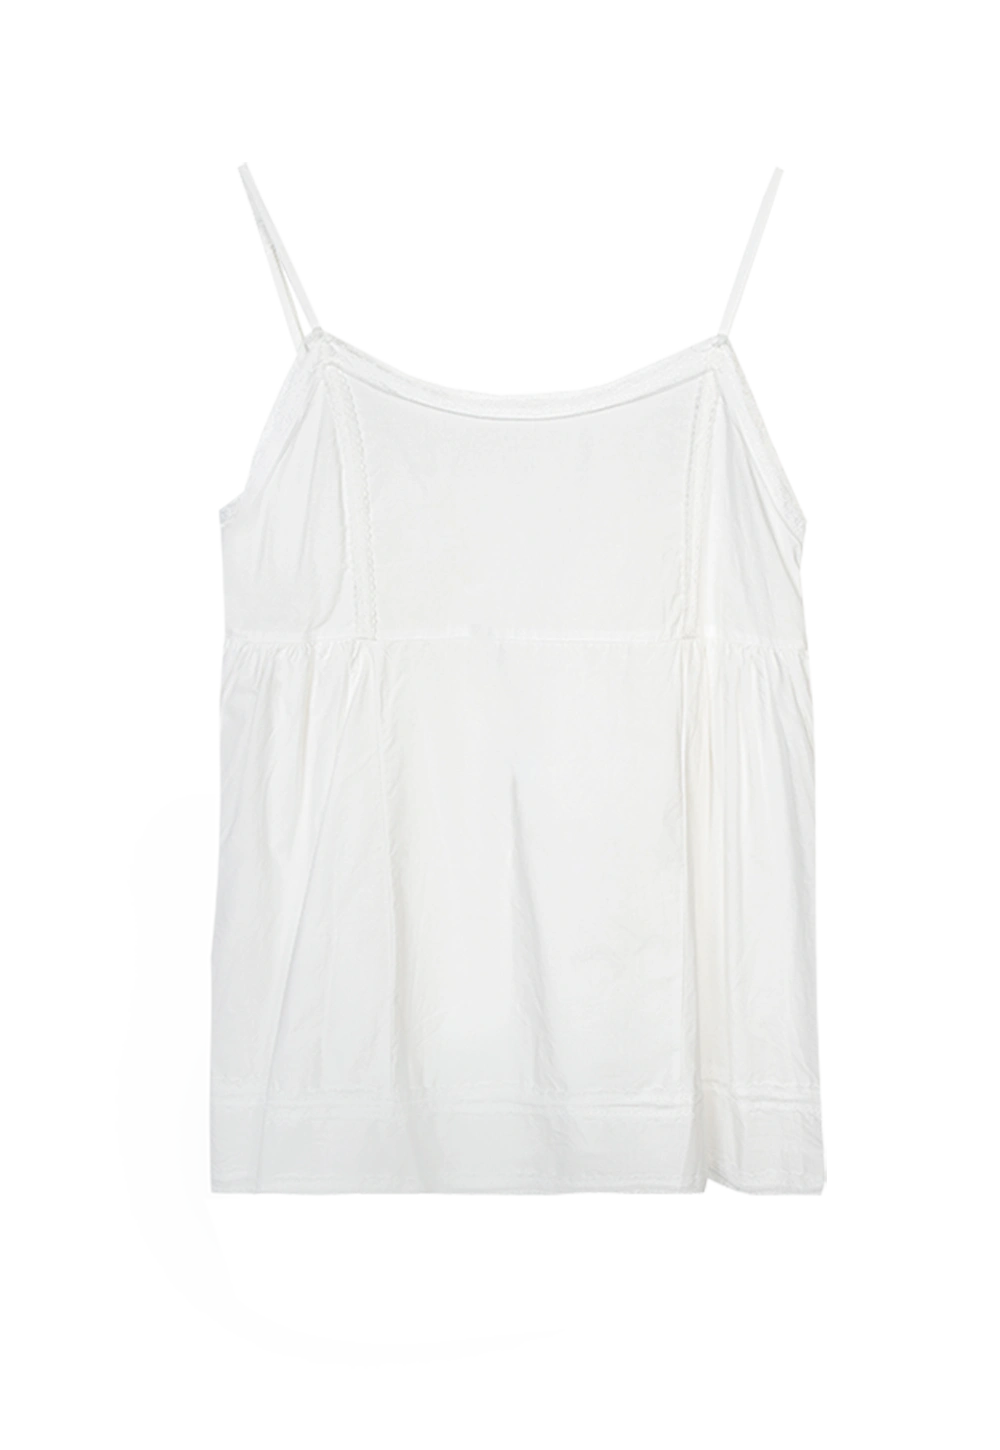 Women's Lightweight Sleeveless Blouse with Adjustable Spaghetti Straps and Flowy Tiered Design